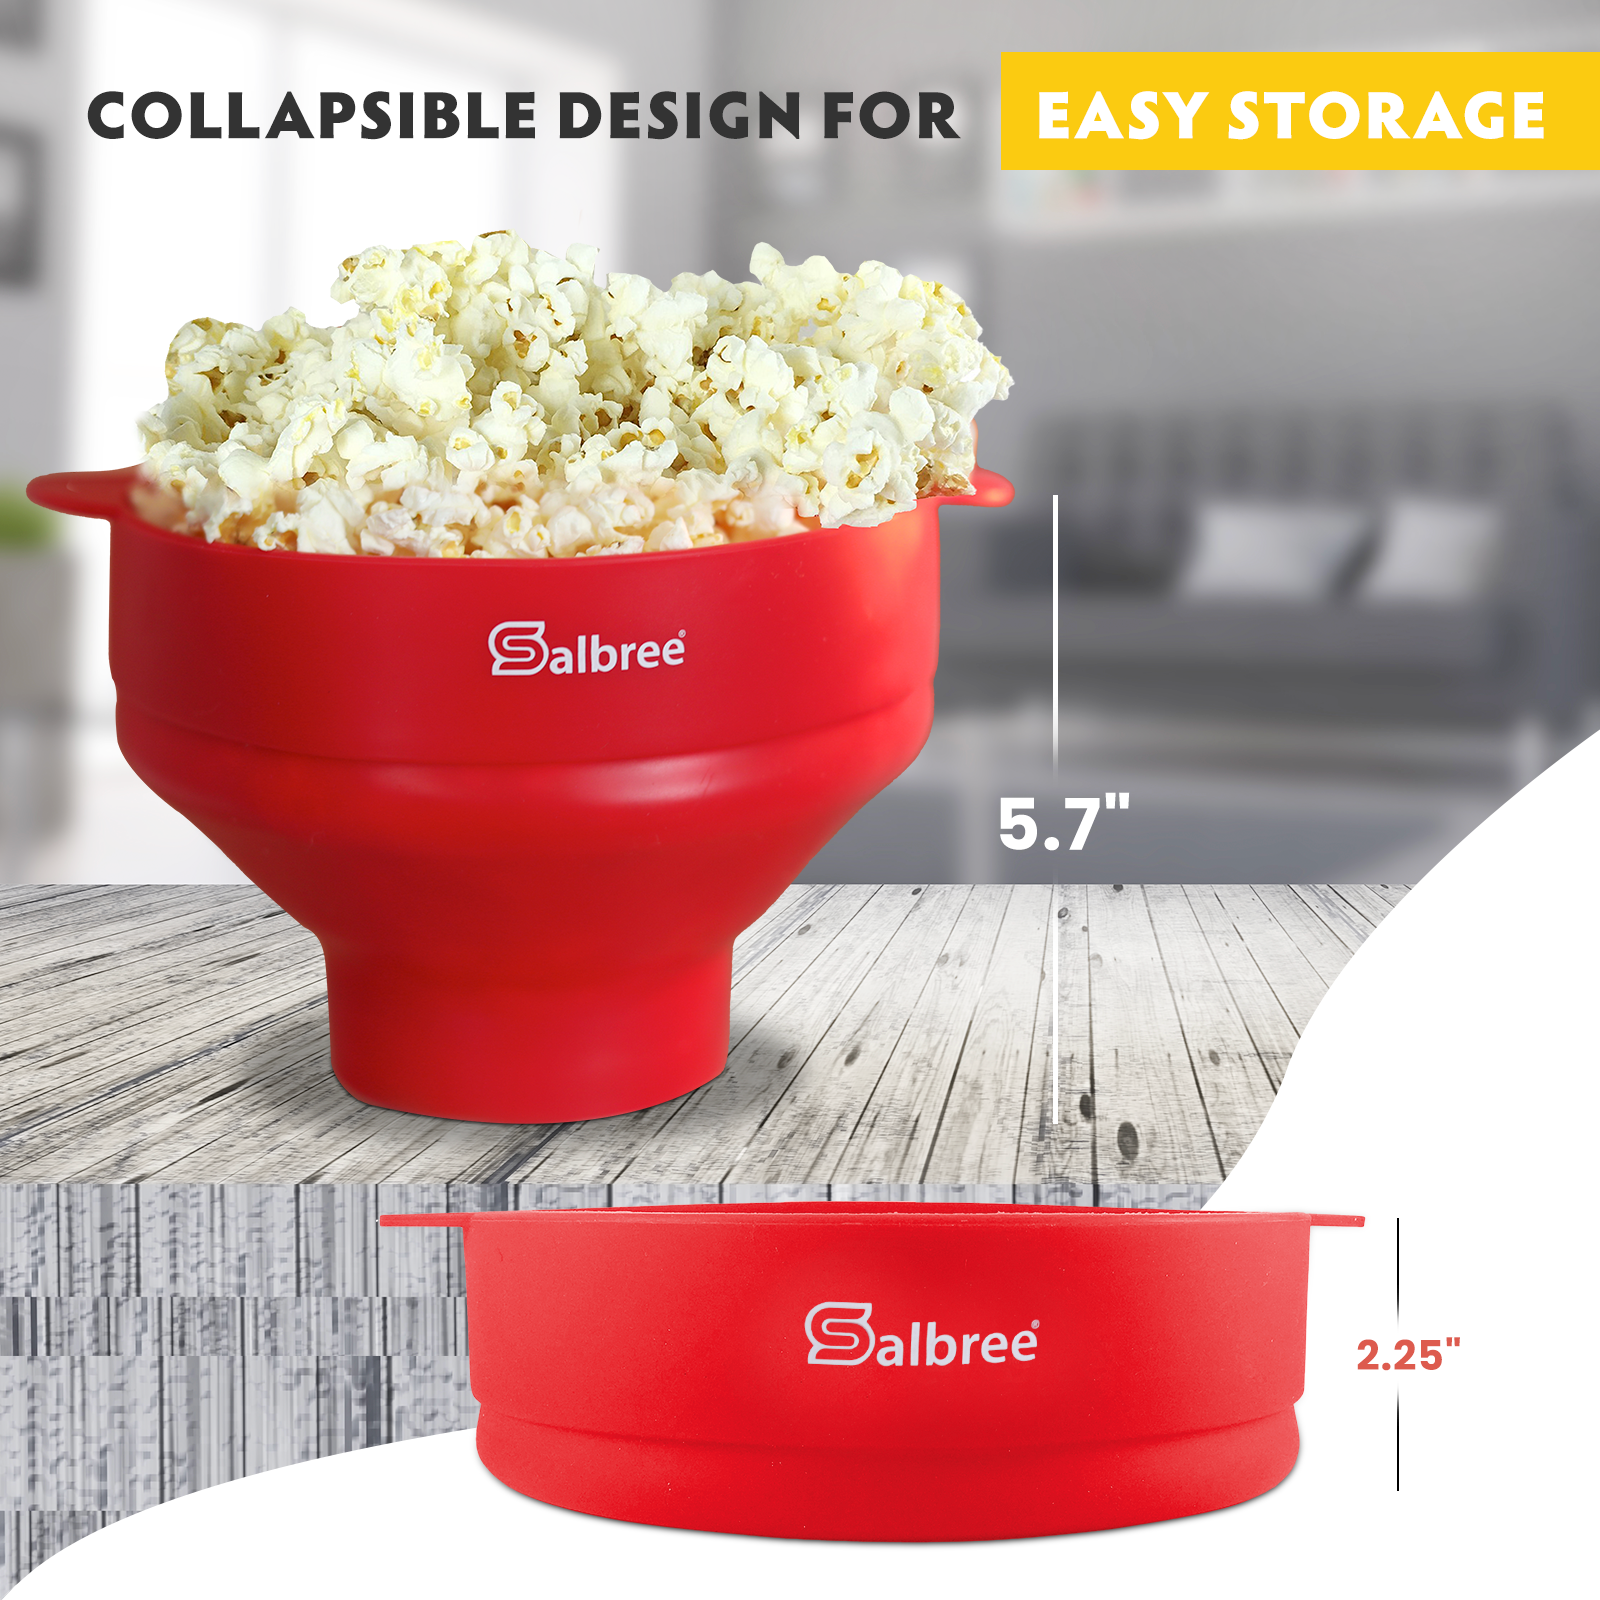 The Original Popco Silicone Microwave Popcorn Popper with Handles | Popcorn Maker | Collapsible Popcorn Bowl | BPA Free and Dishwasher Safe | 15